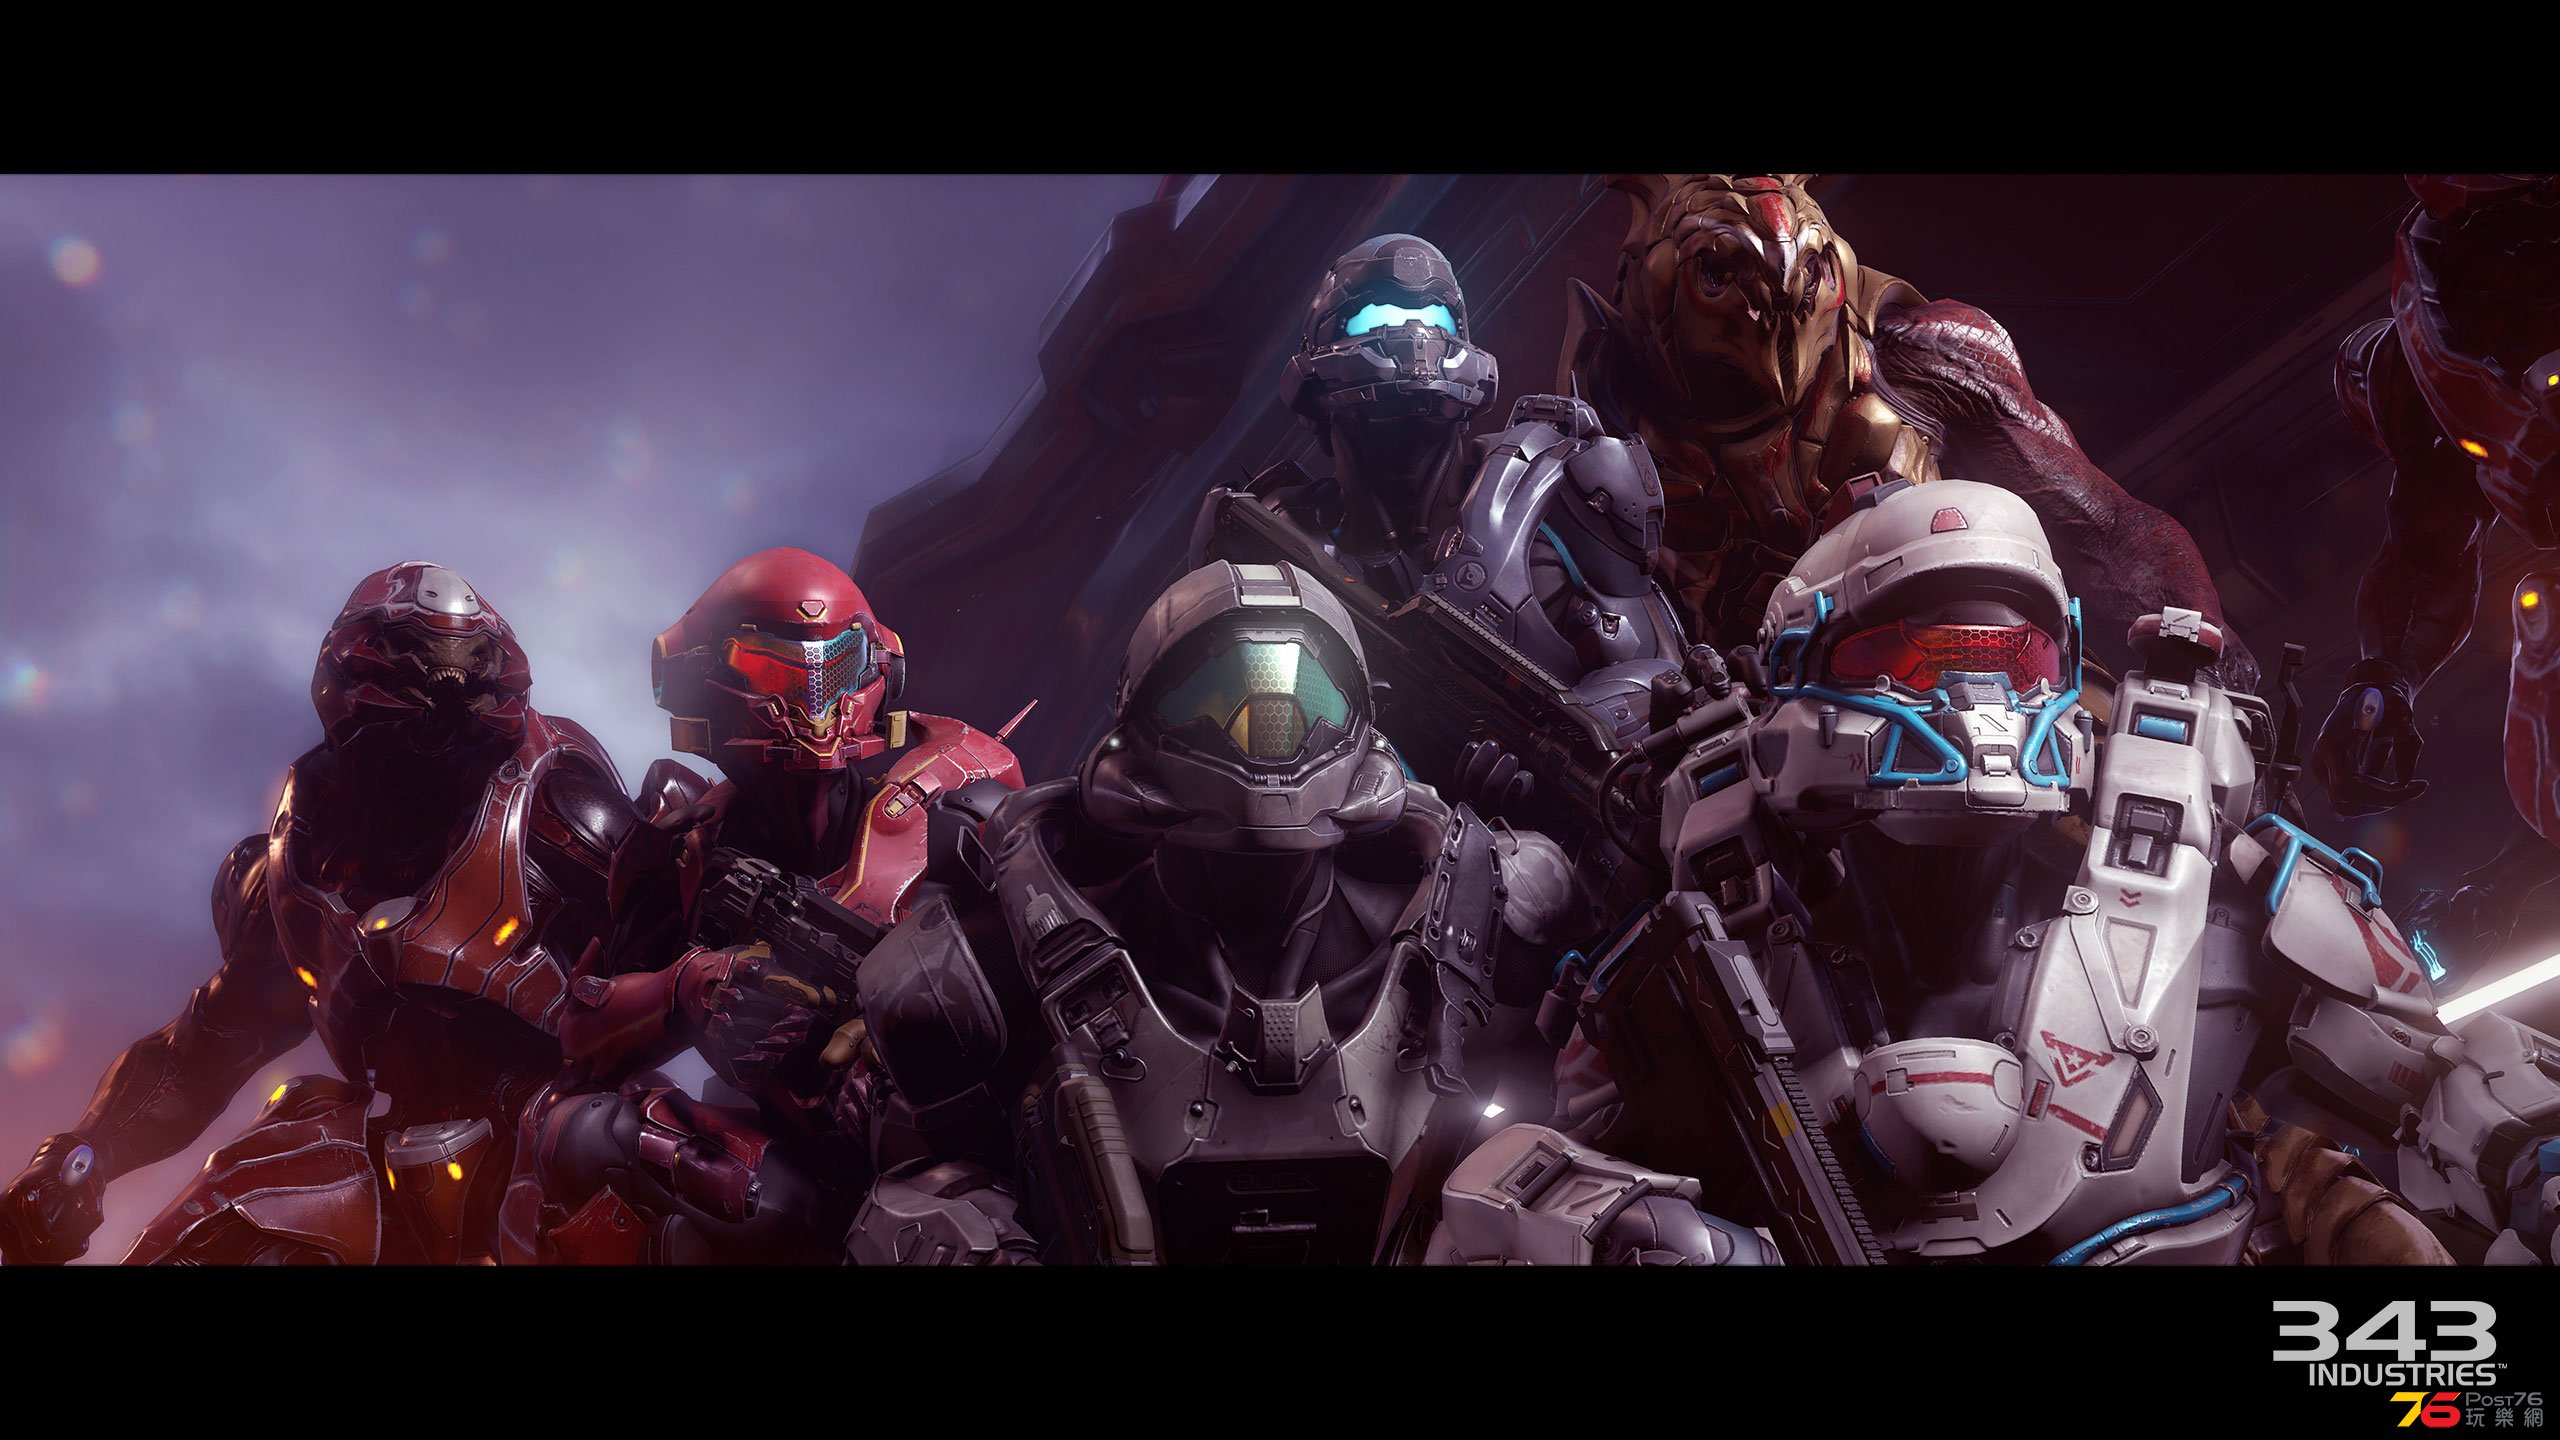 h5-guardians-cinematic-campaign-battle-of-sunaion-osiris-friends-and-family-7938.jpg